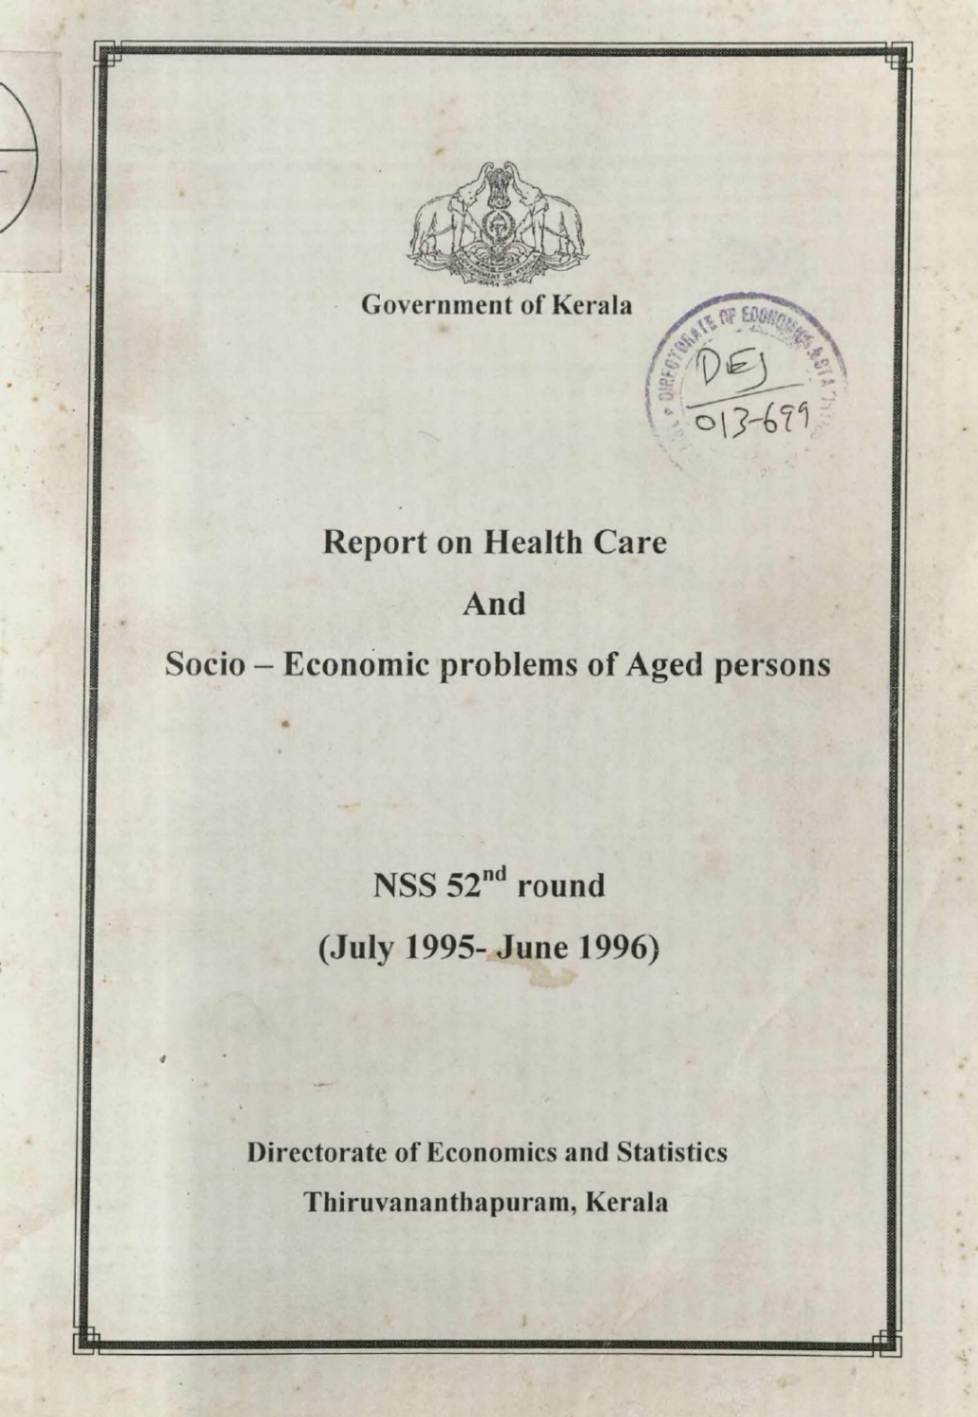 NSS 52nd round - Report On Health Care And Socio - Economic Proplems Of Aged Persons